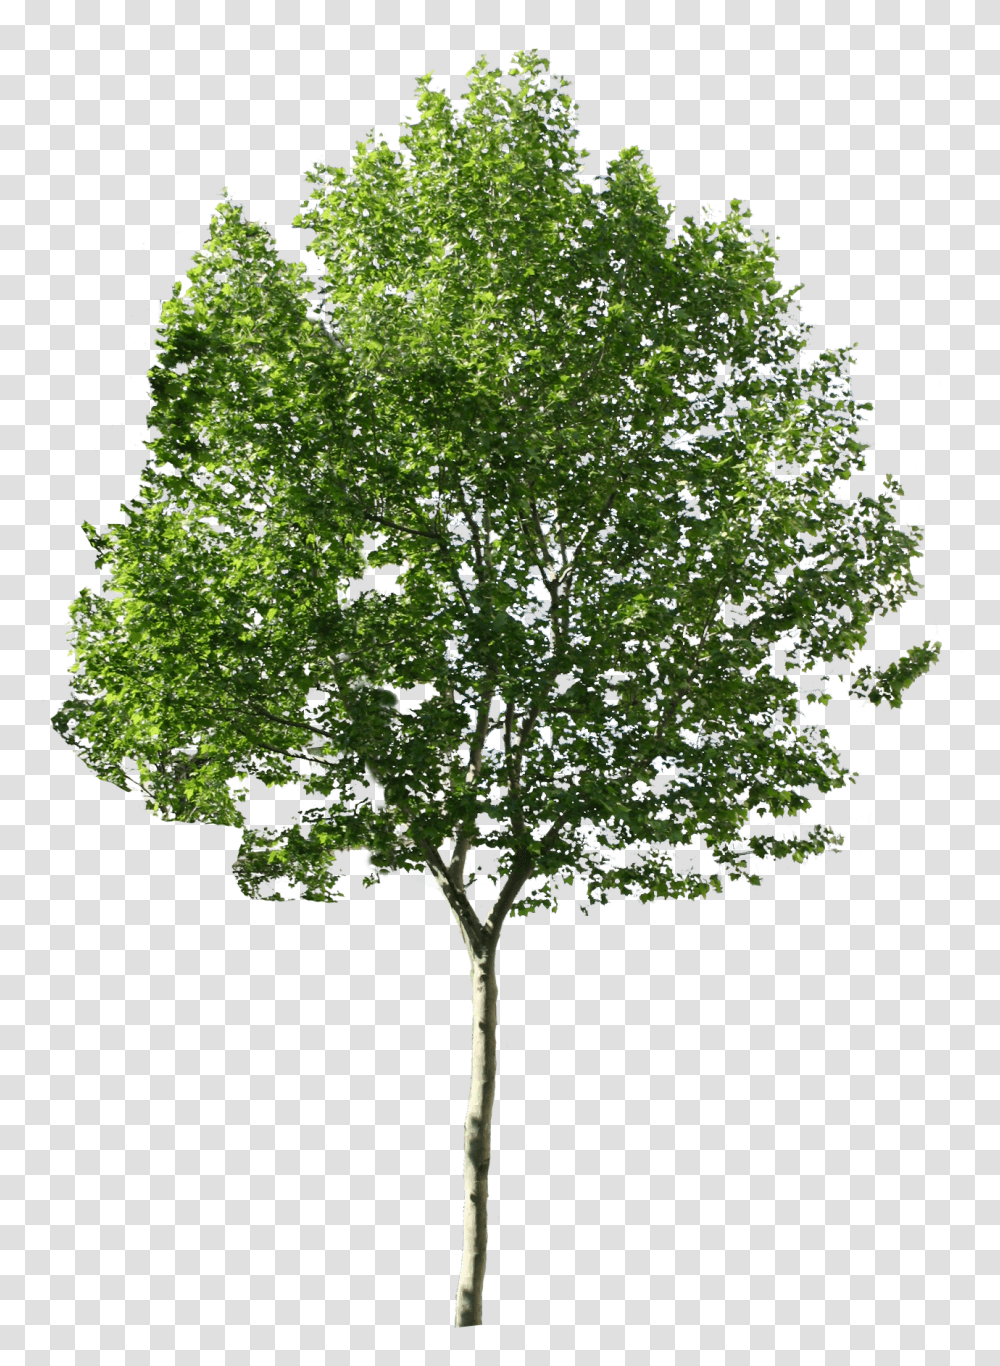 Architecture Trees & Clipart Free Download Ywd Tree Photoshop, Plant, Oak, Sycamore, Maple Transparent Png